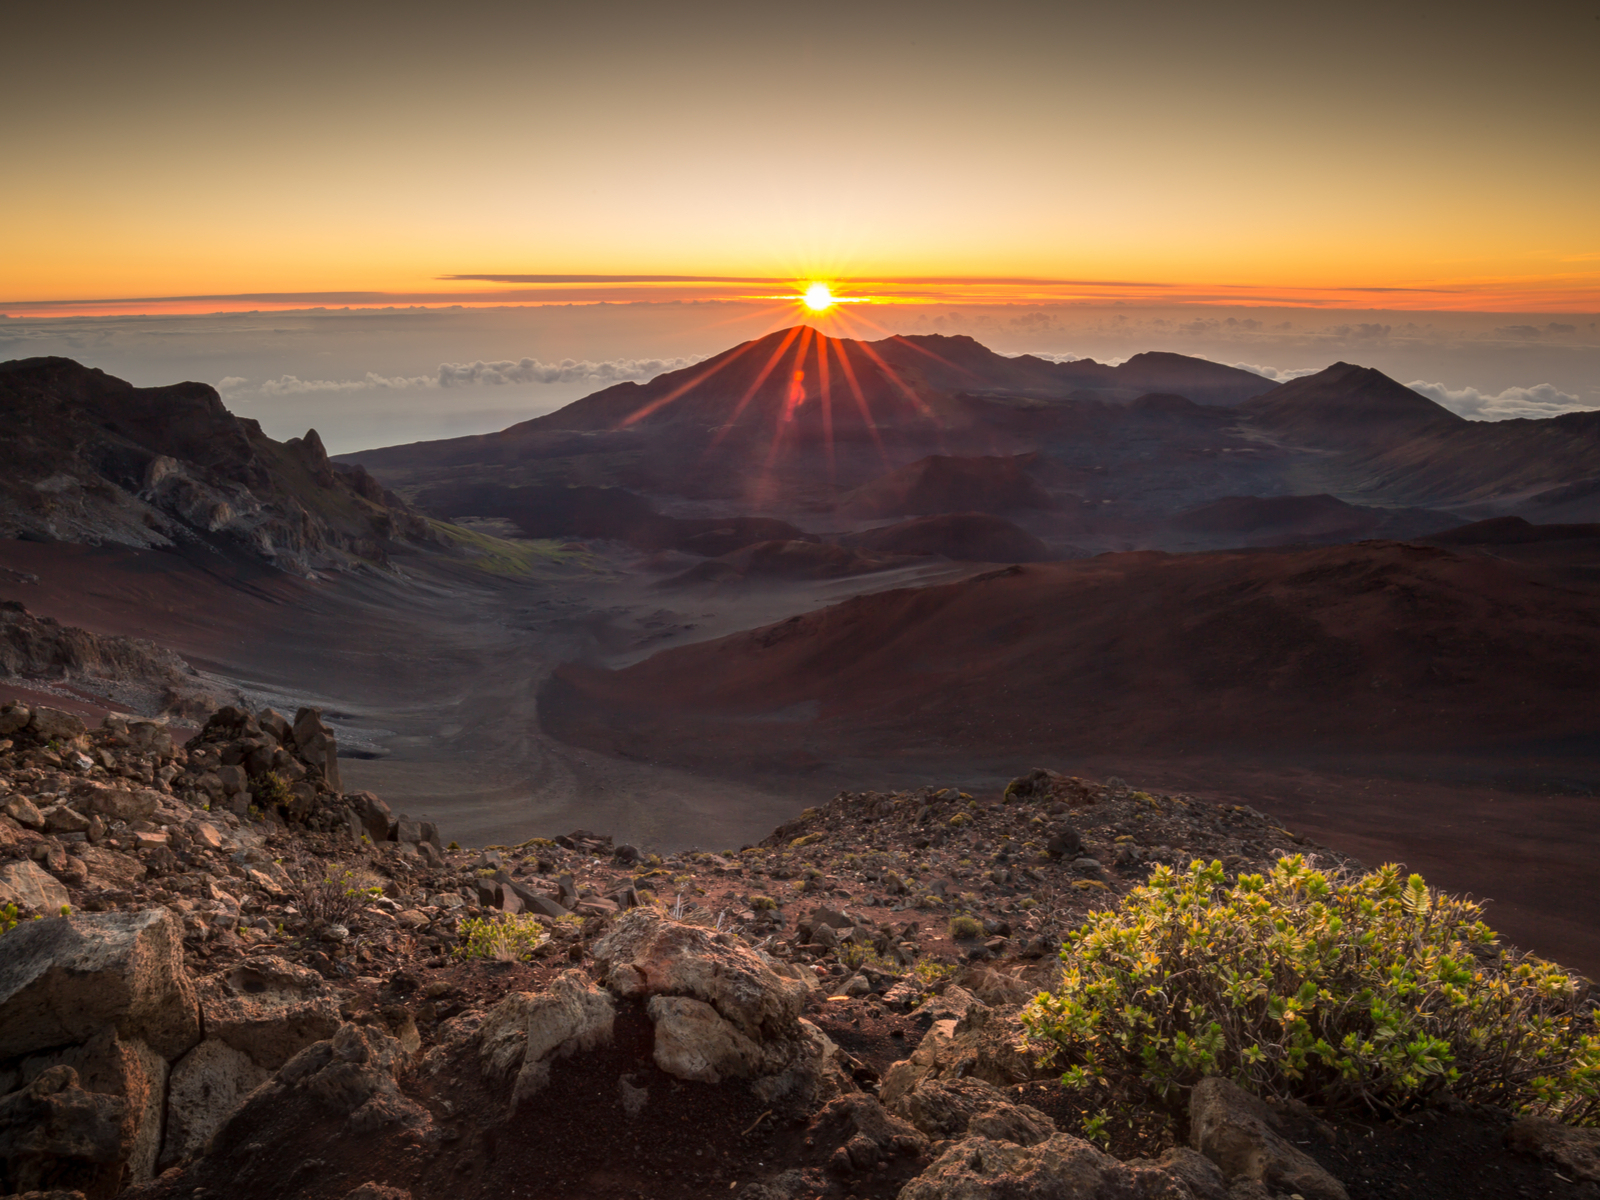 Beautiful morning view from one of the best hikes in Hawaii, the Sliding Sands Trail Haleakalā